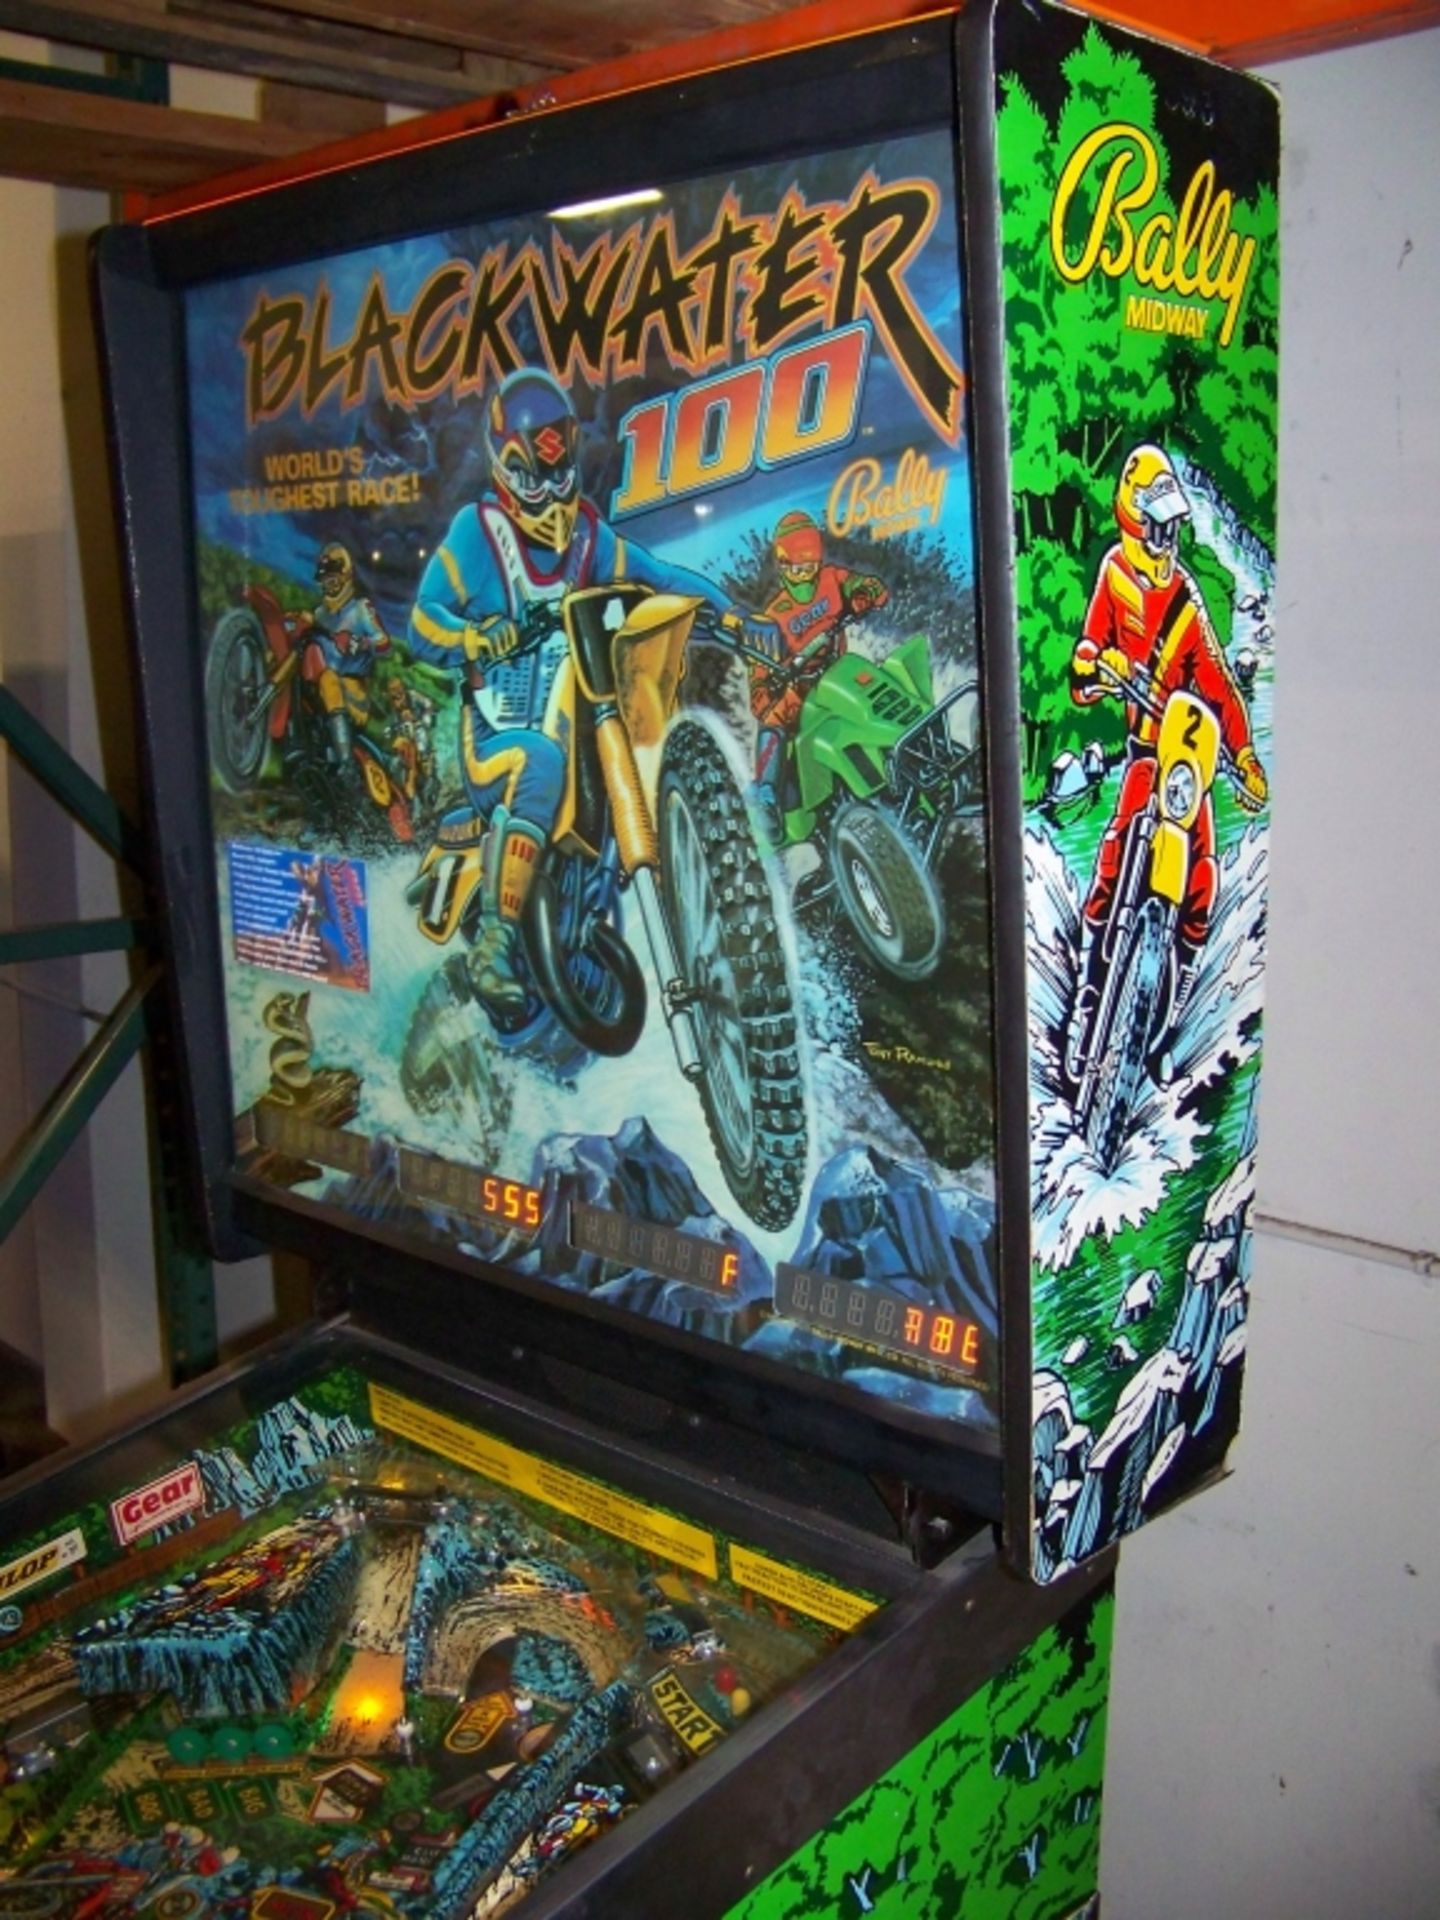 BLACKWATER 100 PINBALL MACHINE BALLY 1988 Item is in used condition. Evidence of wear and commercial - Image 7 of 10